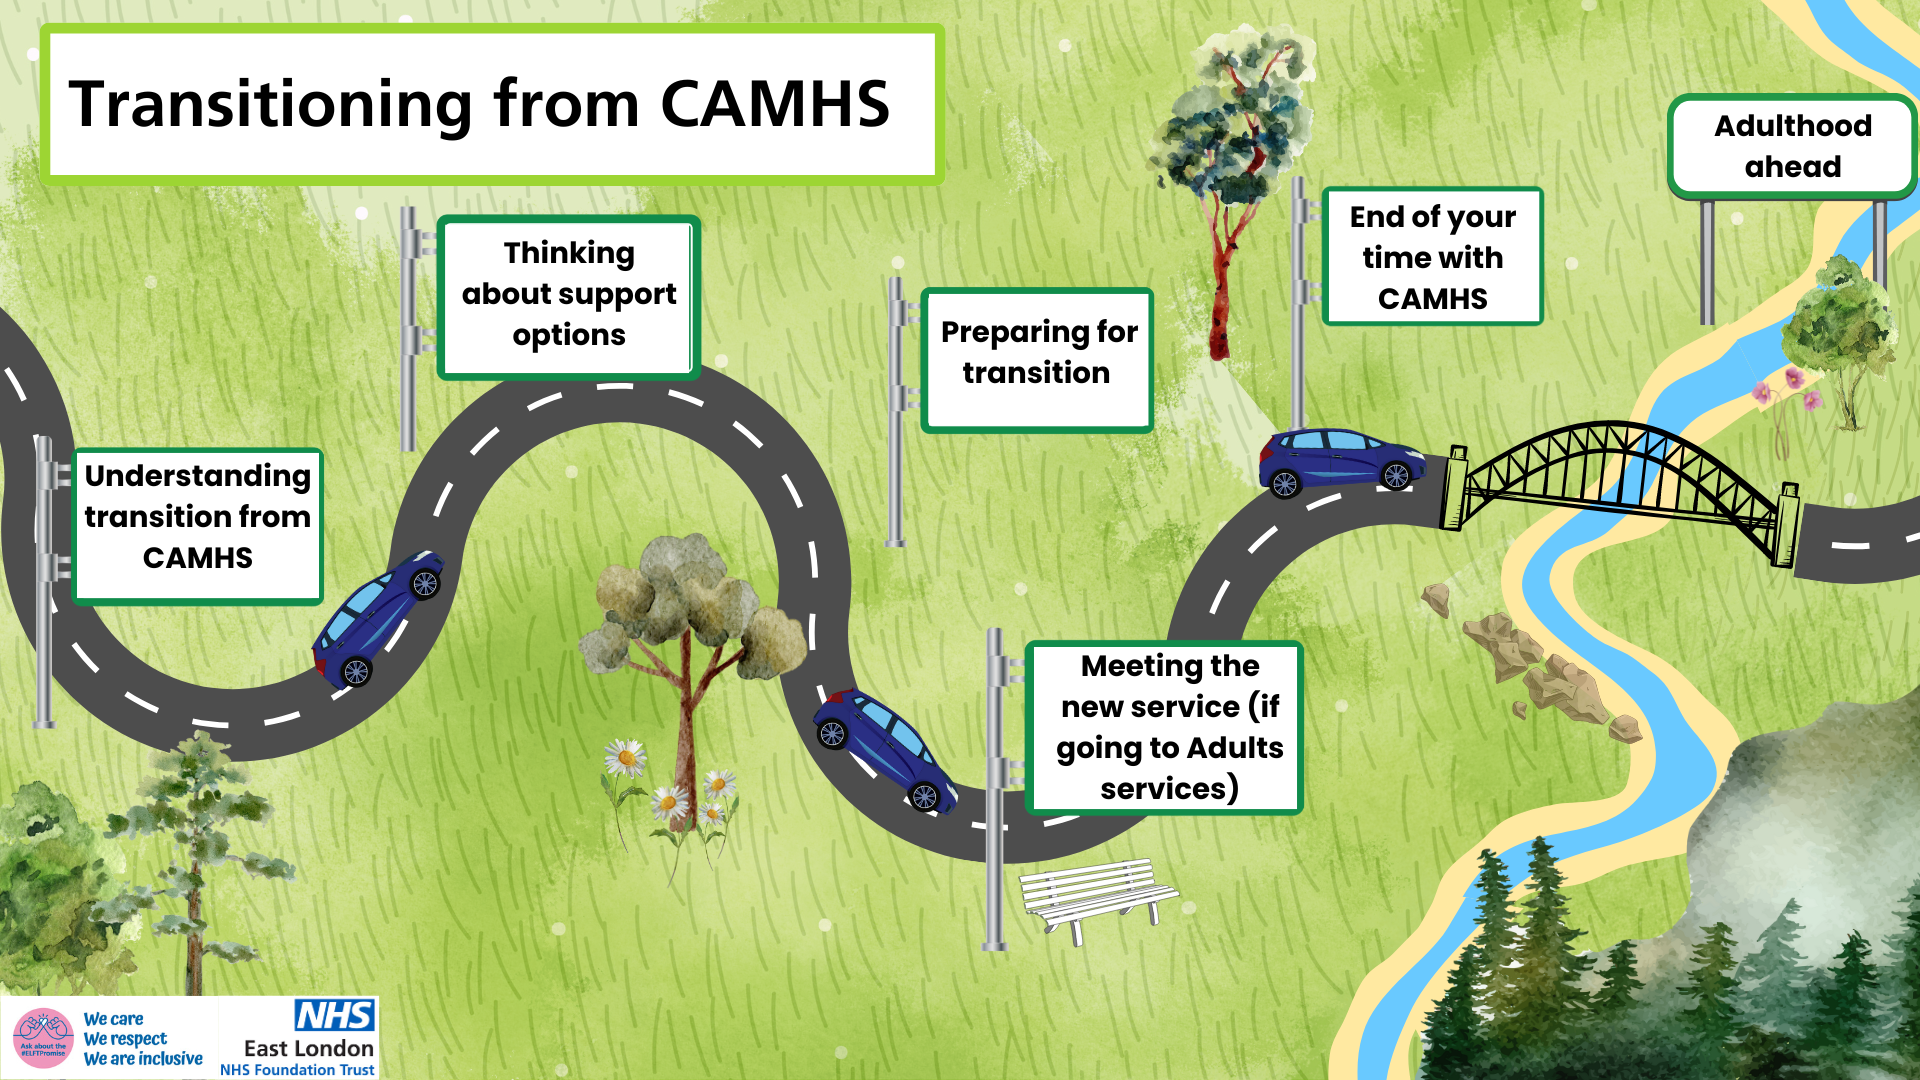 Road graphic showing transition journey